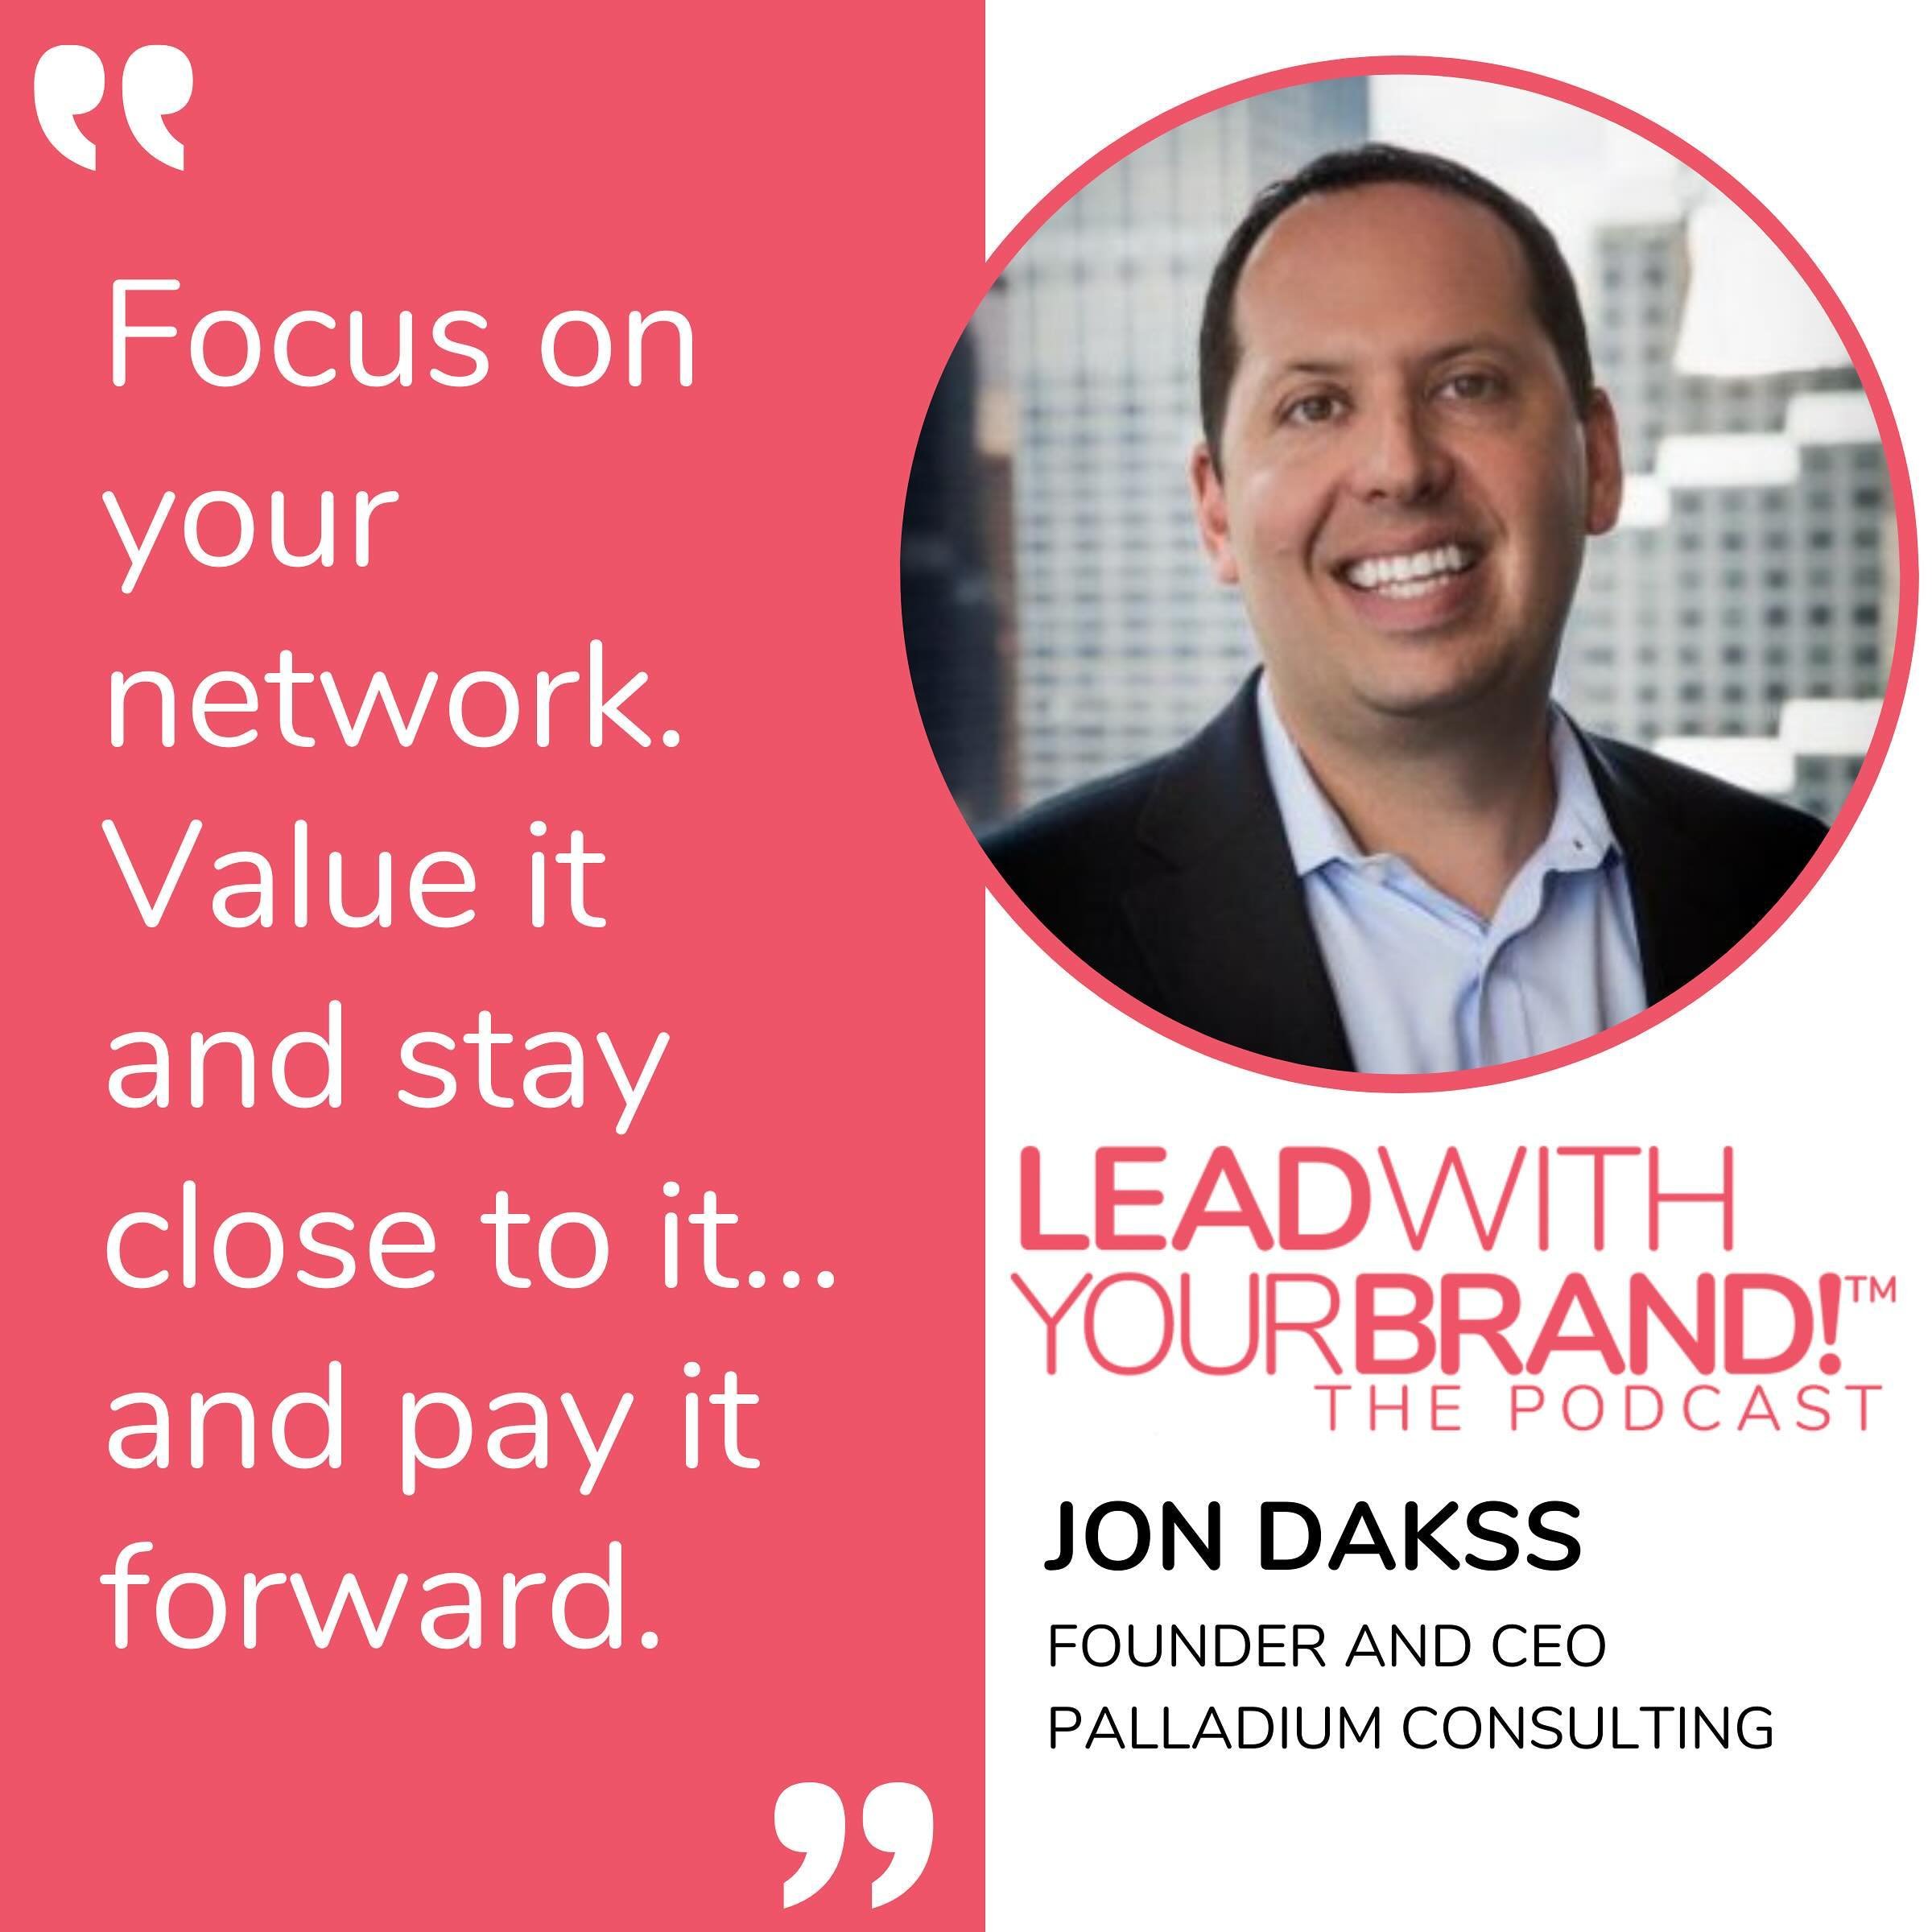 I&rsquo;m excited to announce that Jon Dakss, founder and CEO of Palladium Consulting, is joining me on the #LeadWithYourBrand podcast! 🎧 LeadWithYourBrand.com/podcast ☝🏽LINK IN BIO

Jon is a true innovator in the tech industry, with nearly 40 vide